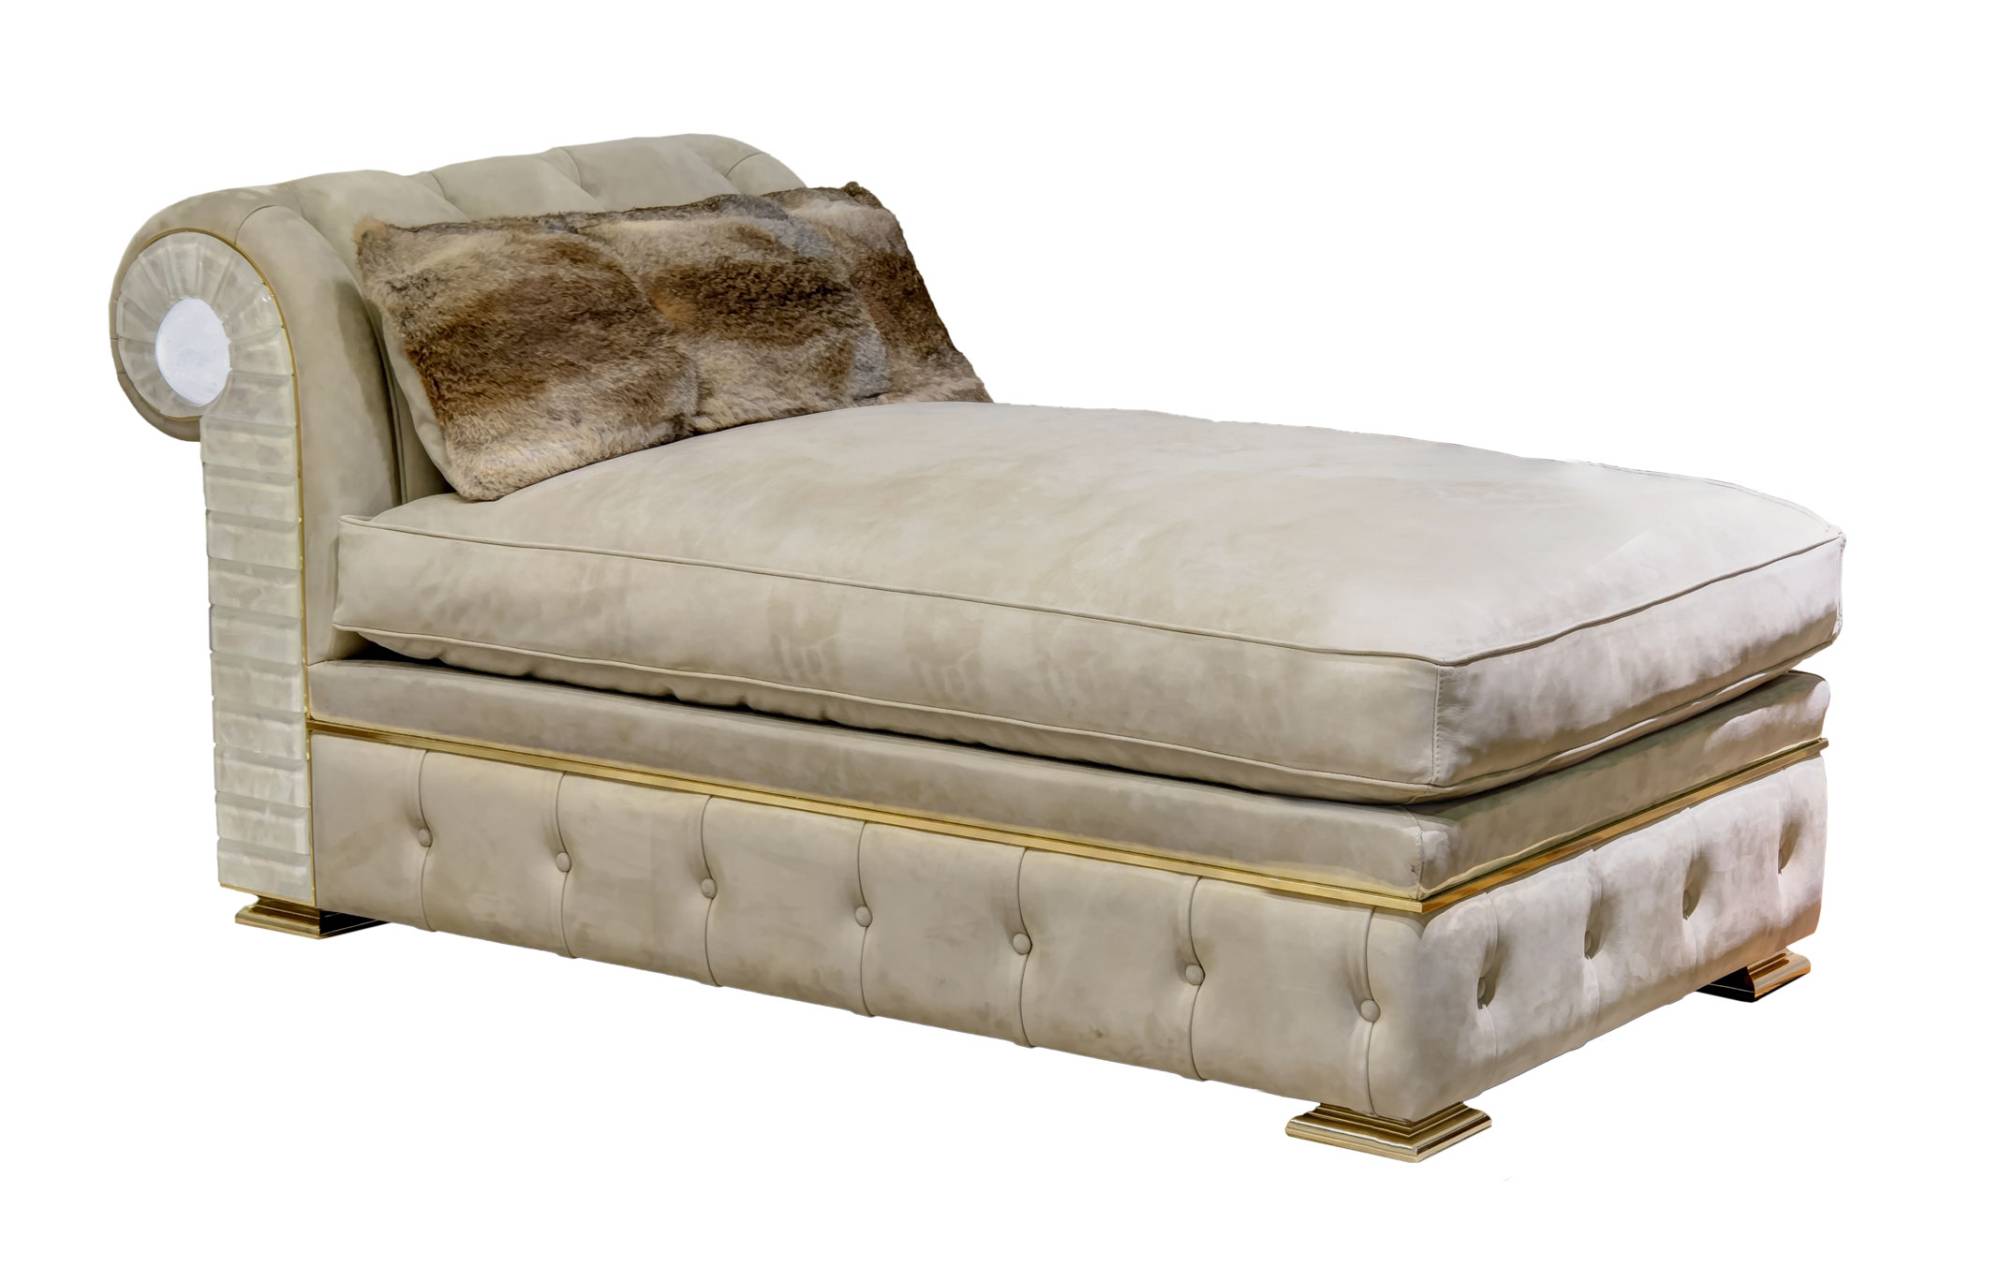 ART. 2076 – C.G. Capelletti Italian Luxury Classic Benches and dormeuses. Transform your space with sophisticated made in italy classic interior design.